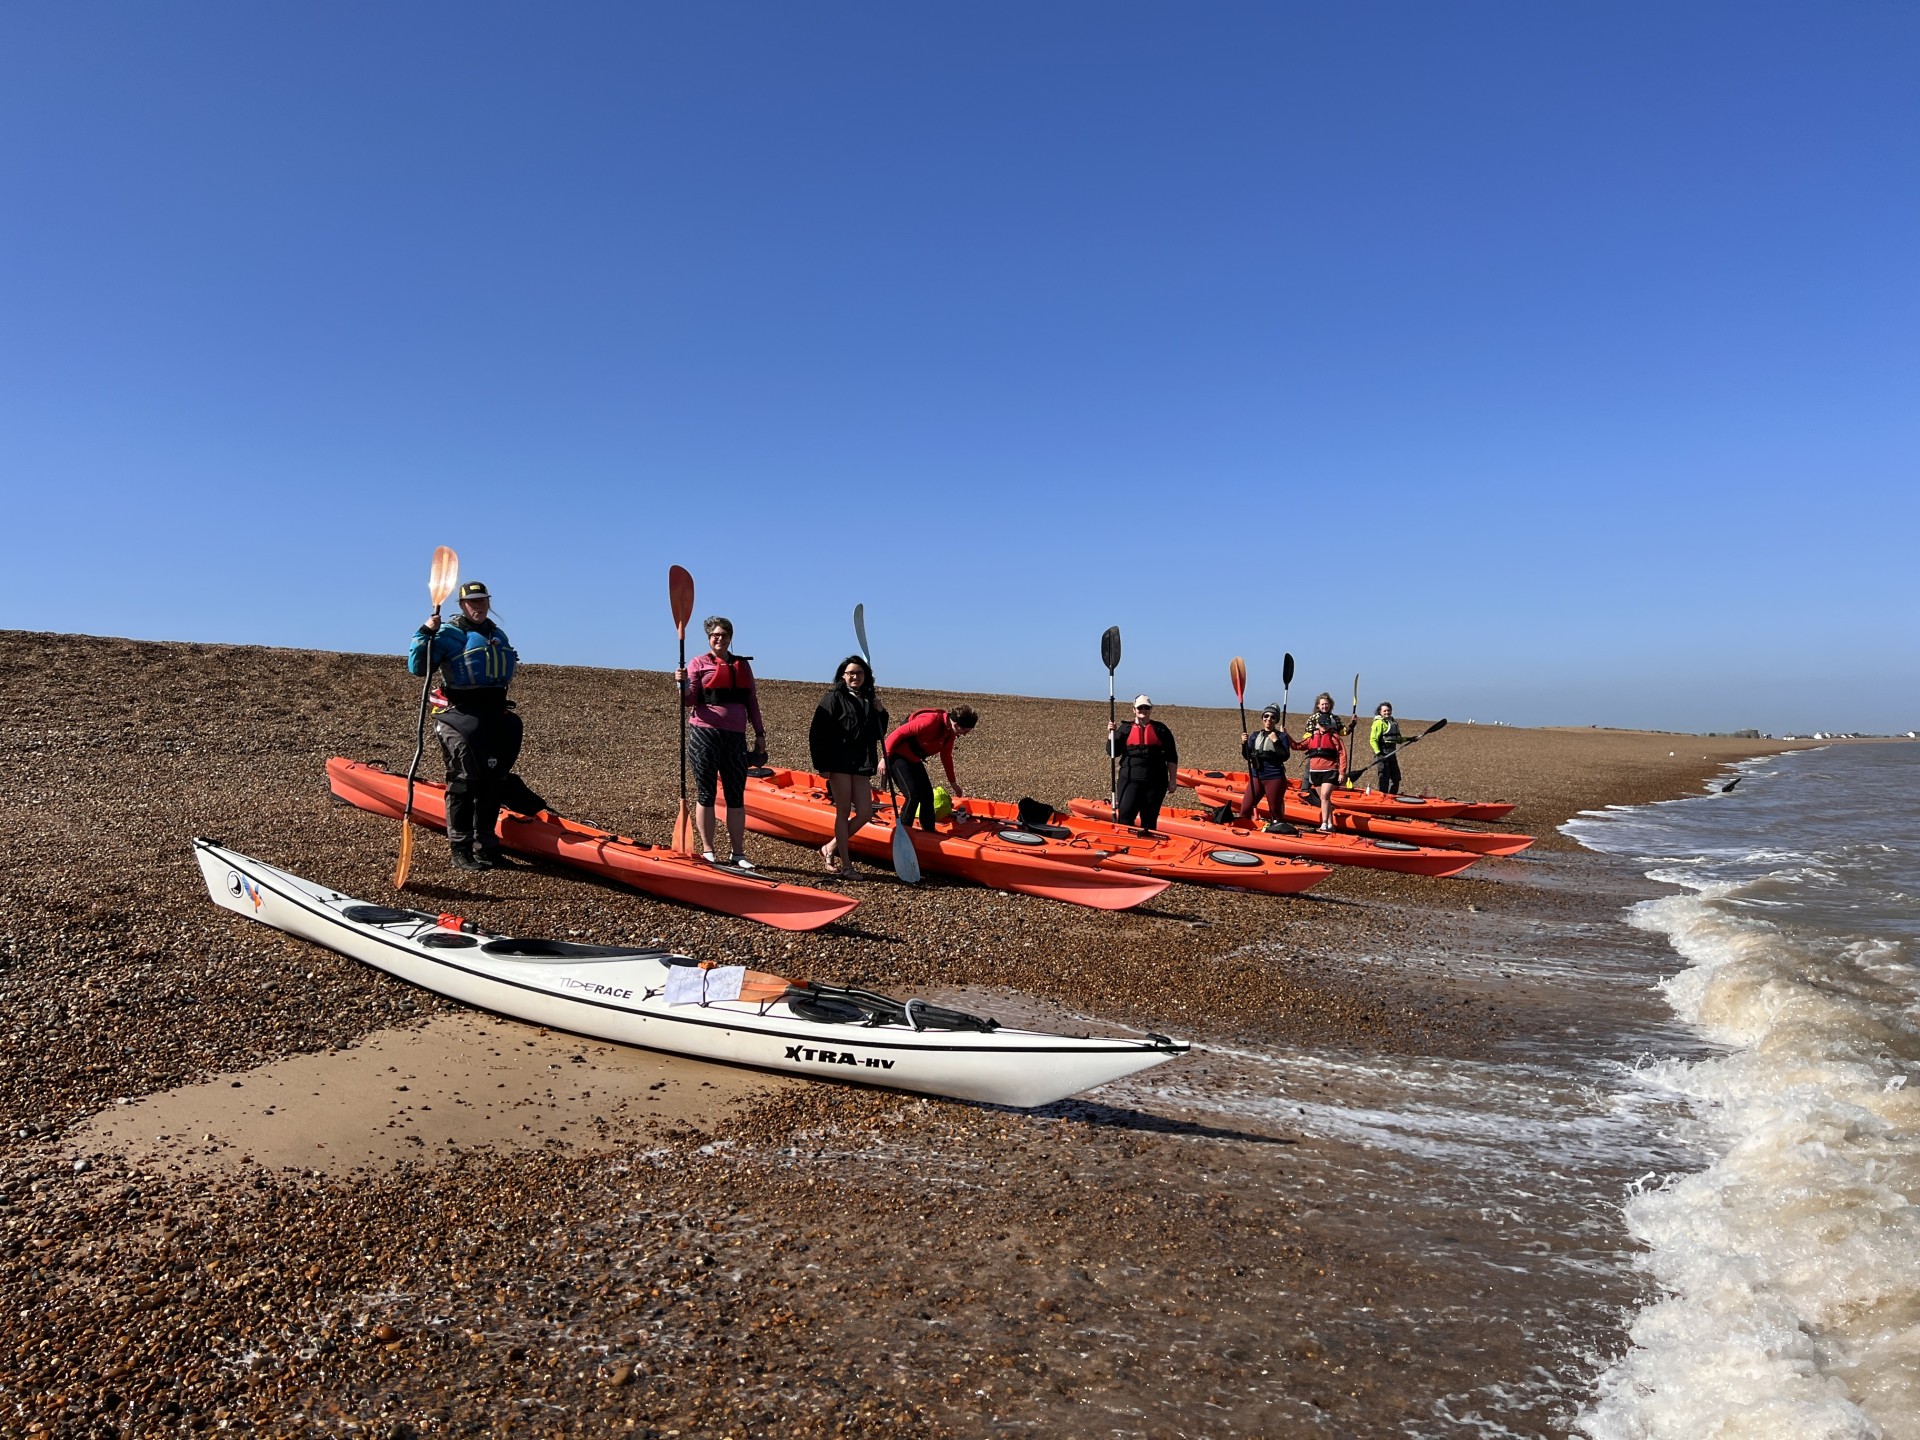 Launching another group on the beautiful Suffolk coastline with NOMAD Sea Kayaking.